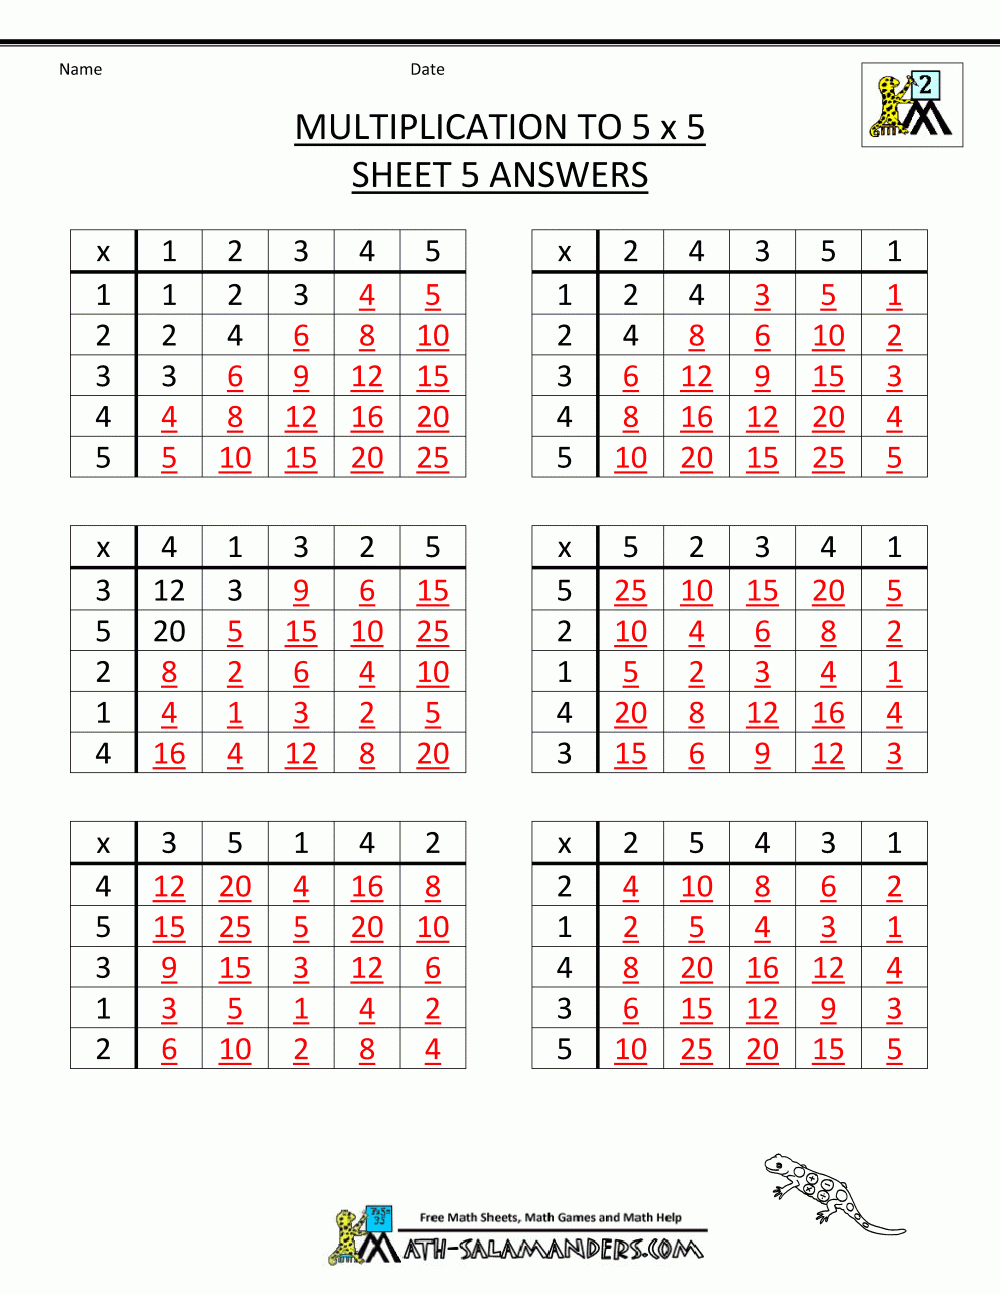 Multiplication To 5X5 Worksheets For 2Nd Grade within Multiplication Worksheets Random Order